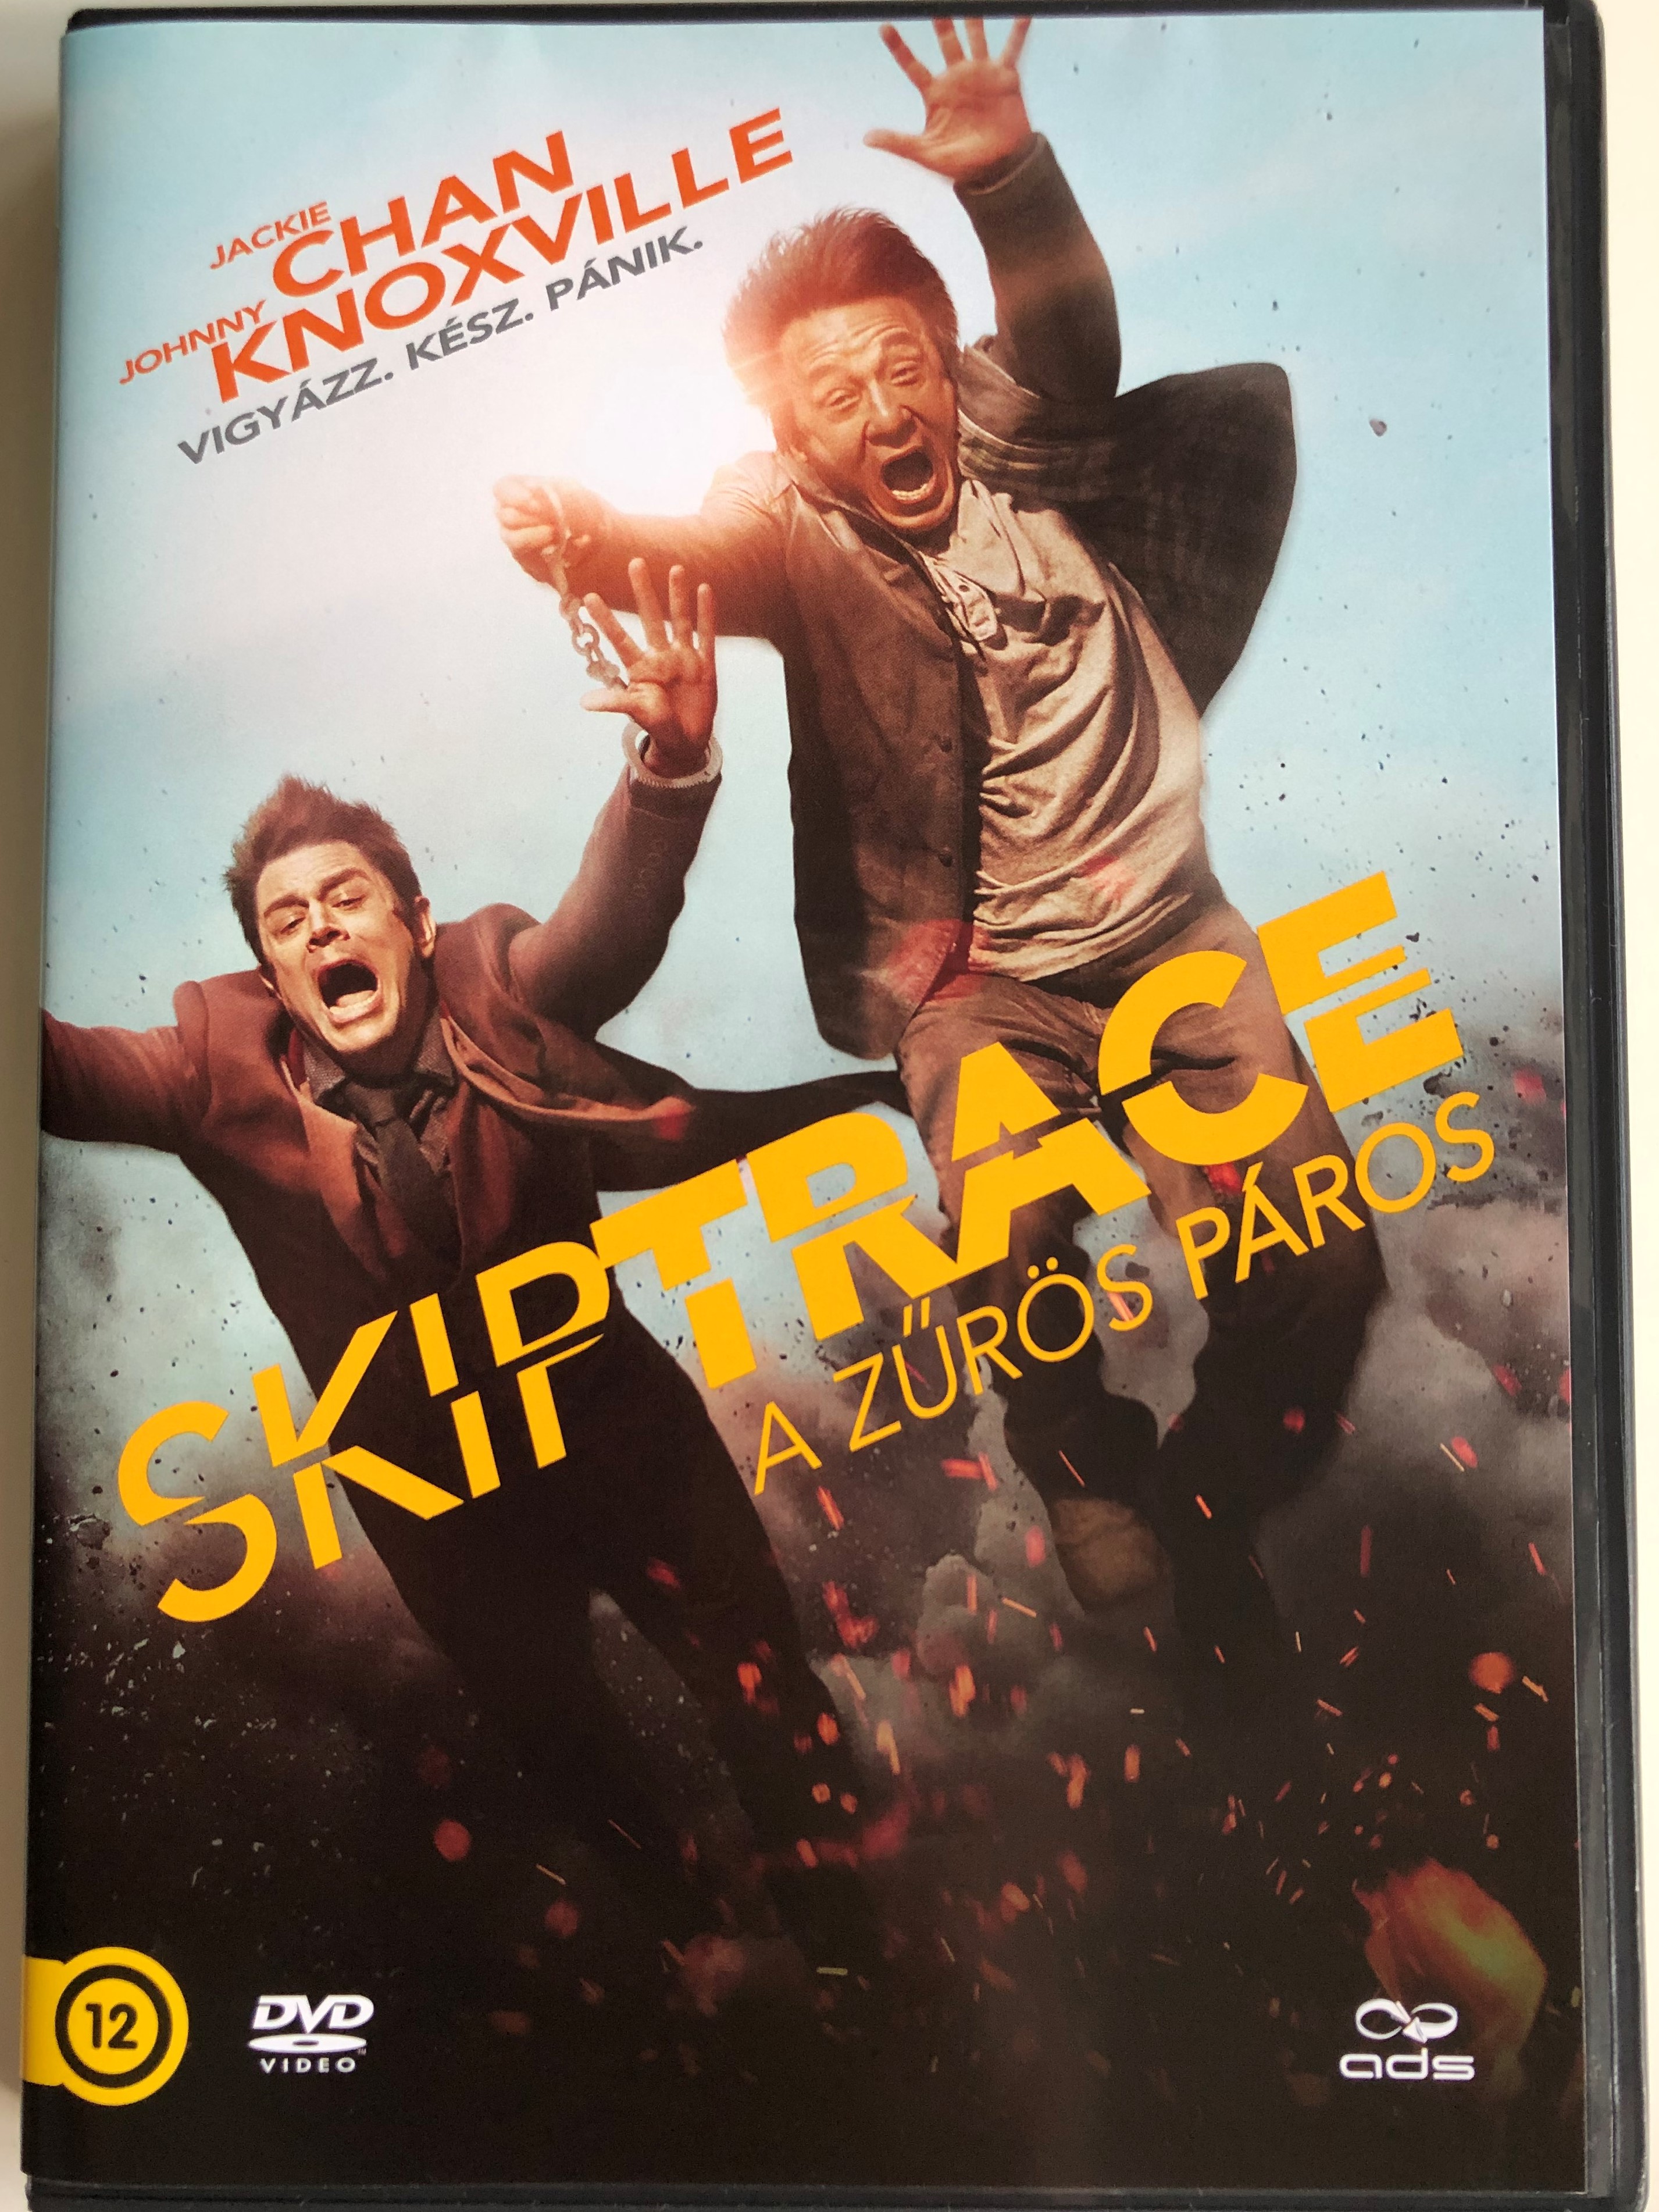 skiptrace-dvd-2016-a-z-r-s-p-ros-directed-by-renny-harlin-starring-jackie-chan-johhny-knoxville-1-.jpg